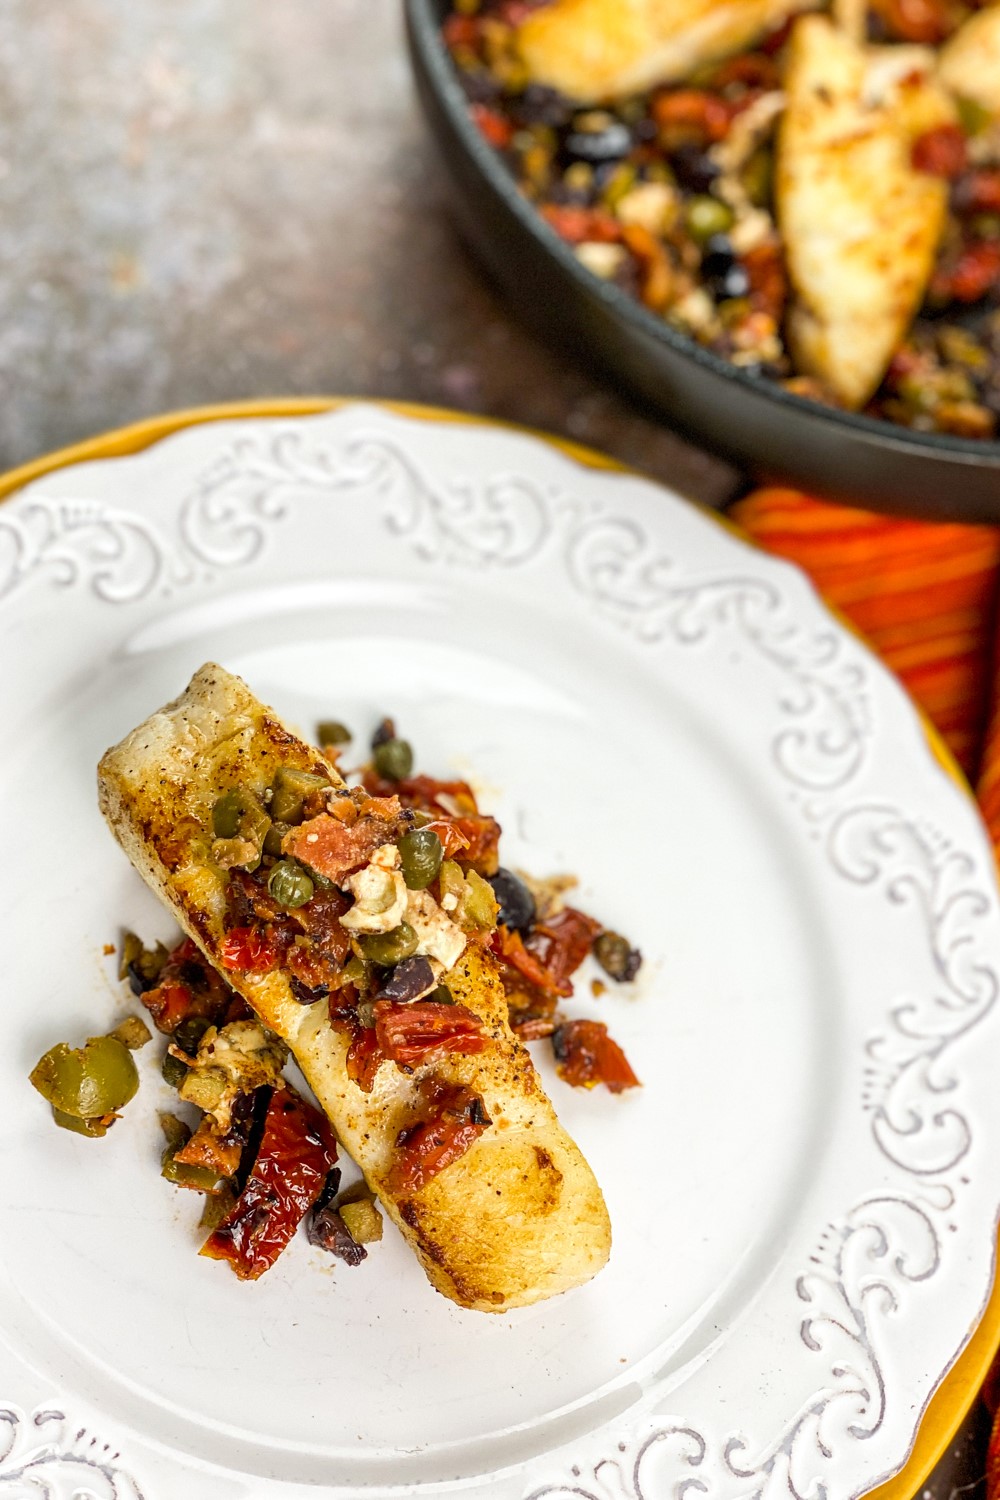 This recipe for pan-fried Mediterranean White Fish with Sun-Dried Tomato Tapenade is a quick and flavourful weeknight meal.